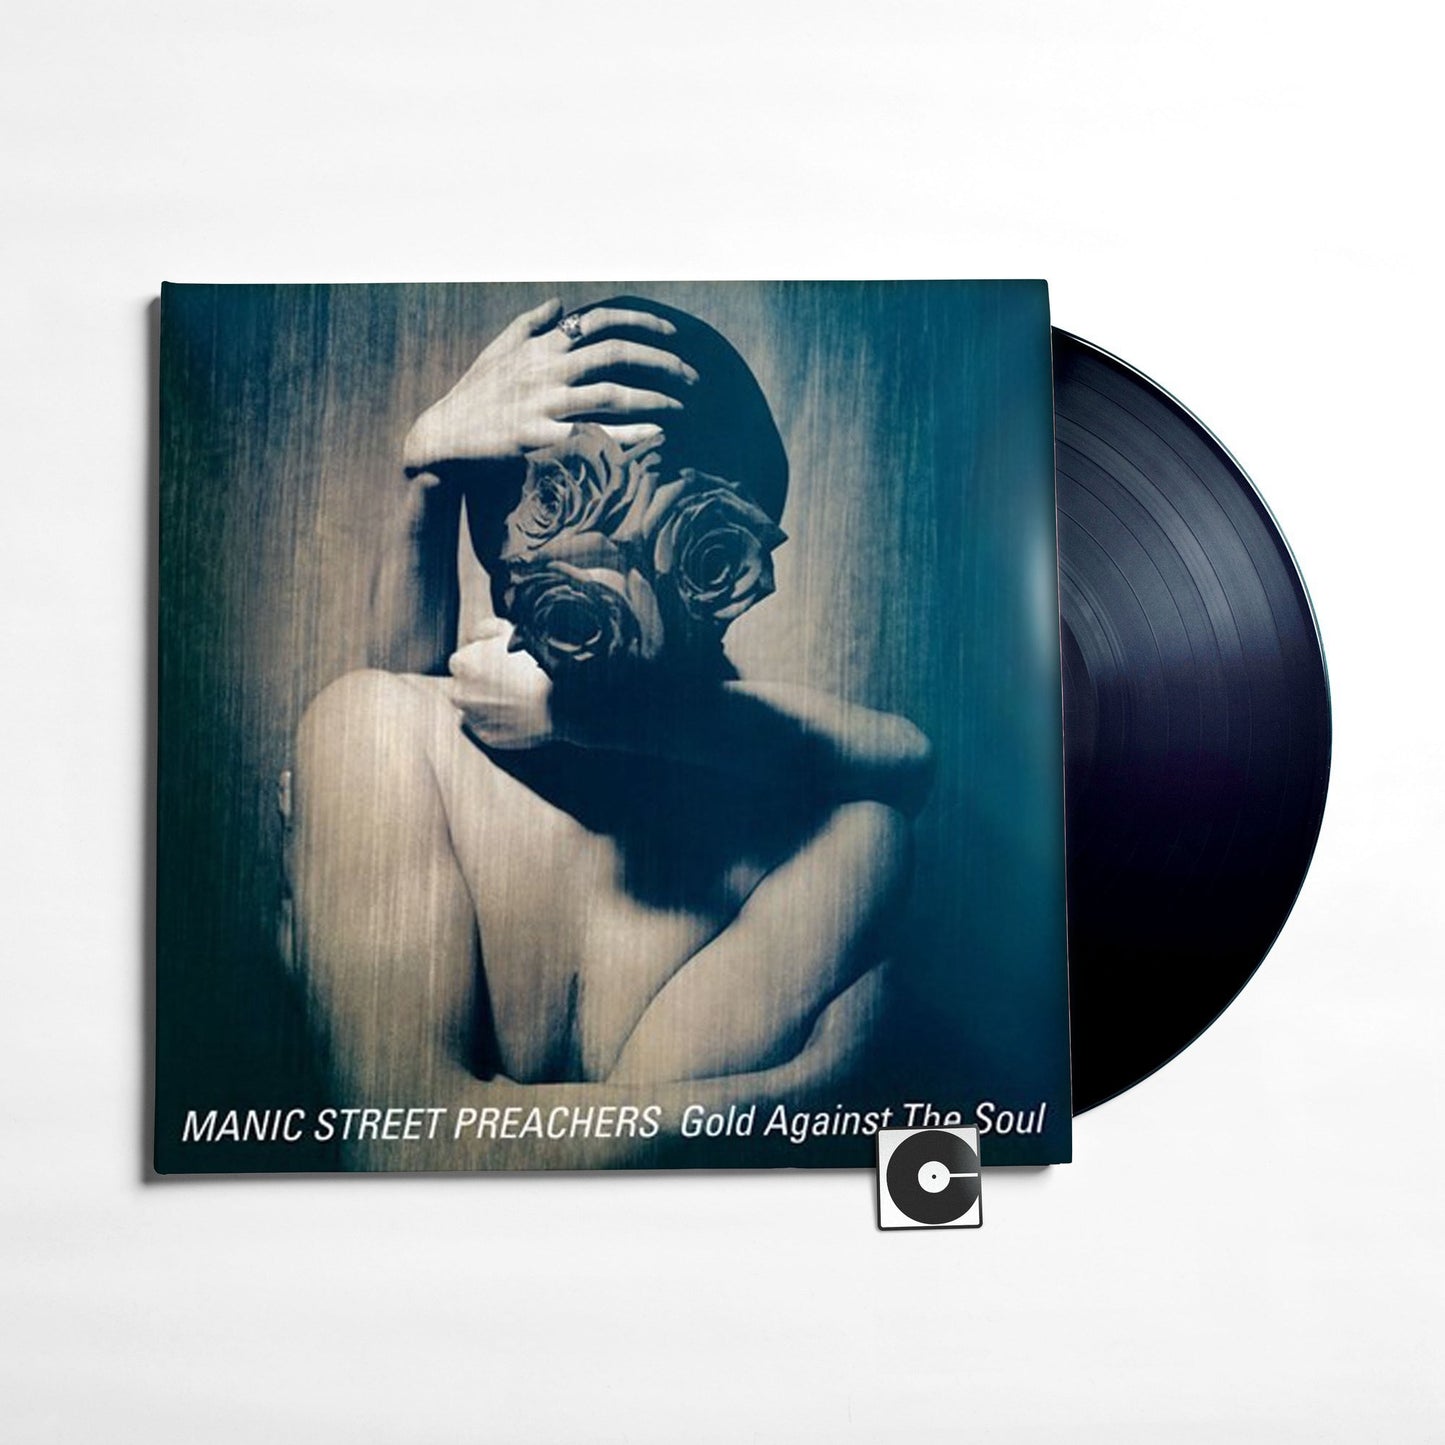 Manic Street Preachers - "Gold Against The Soul"